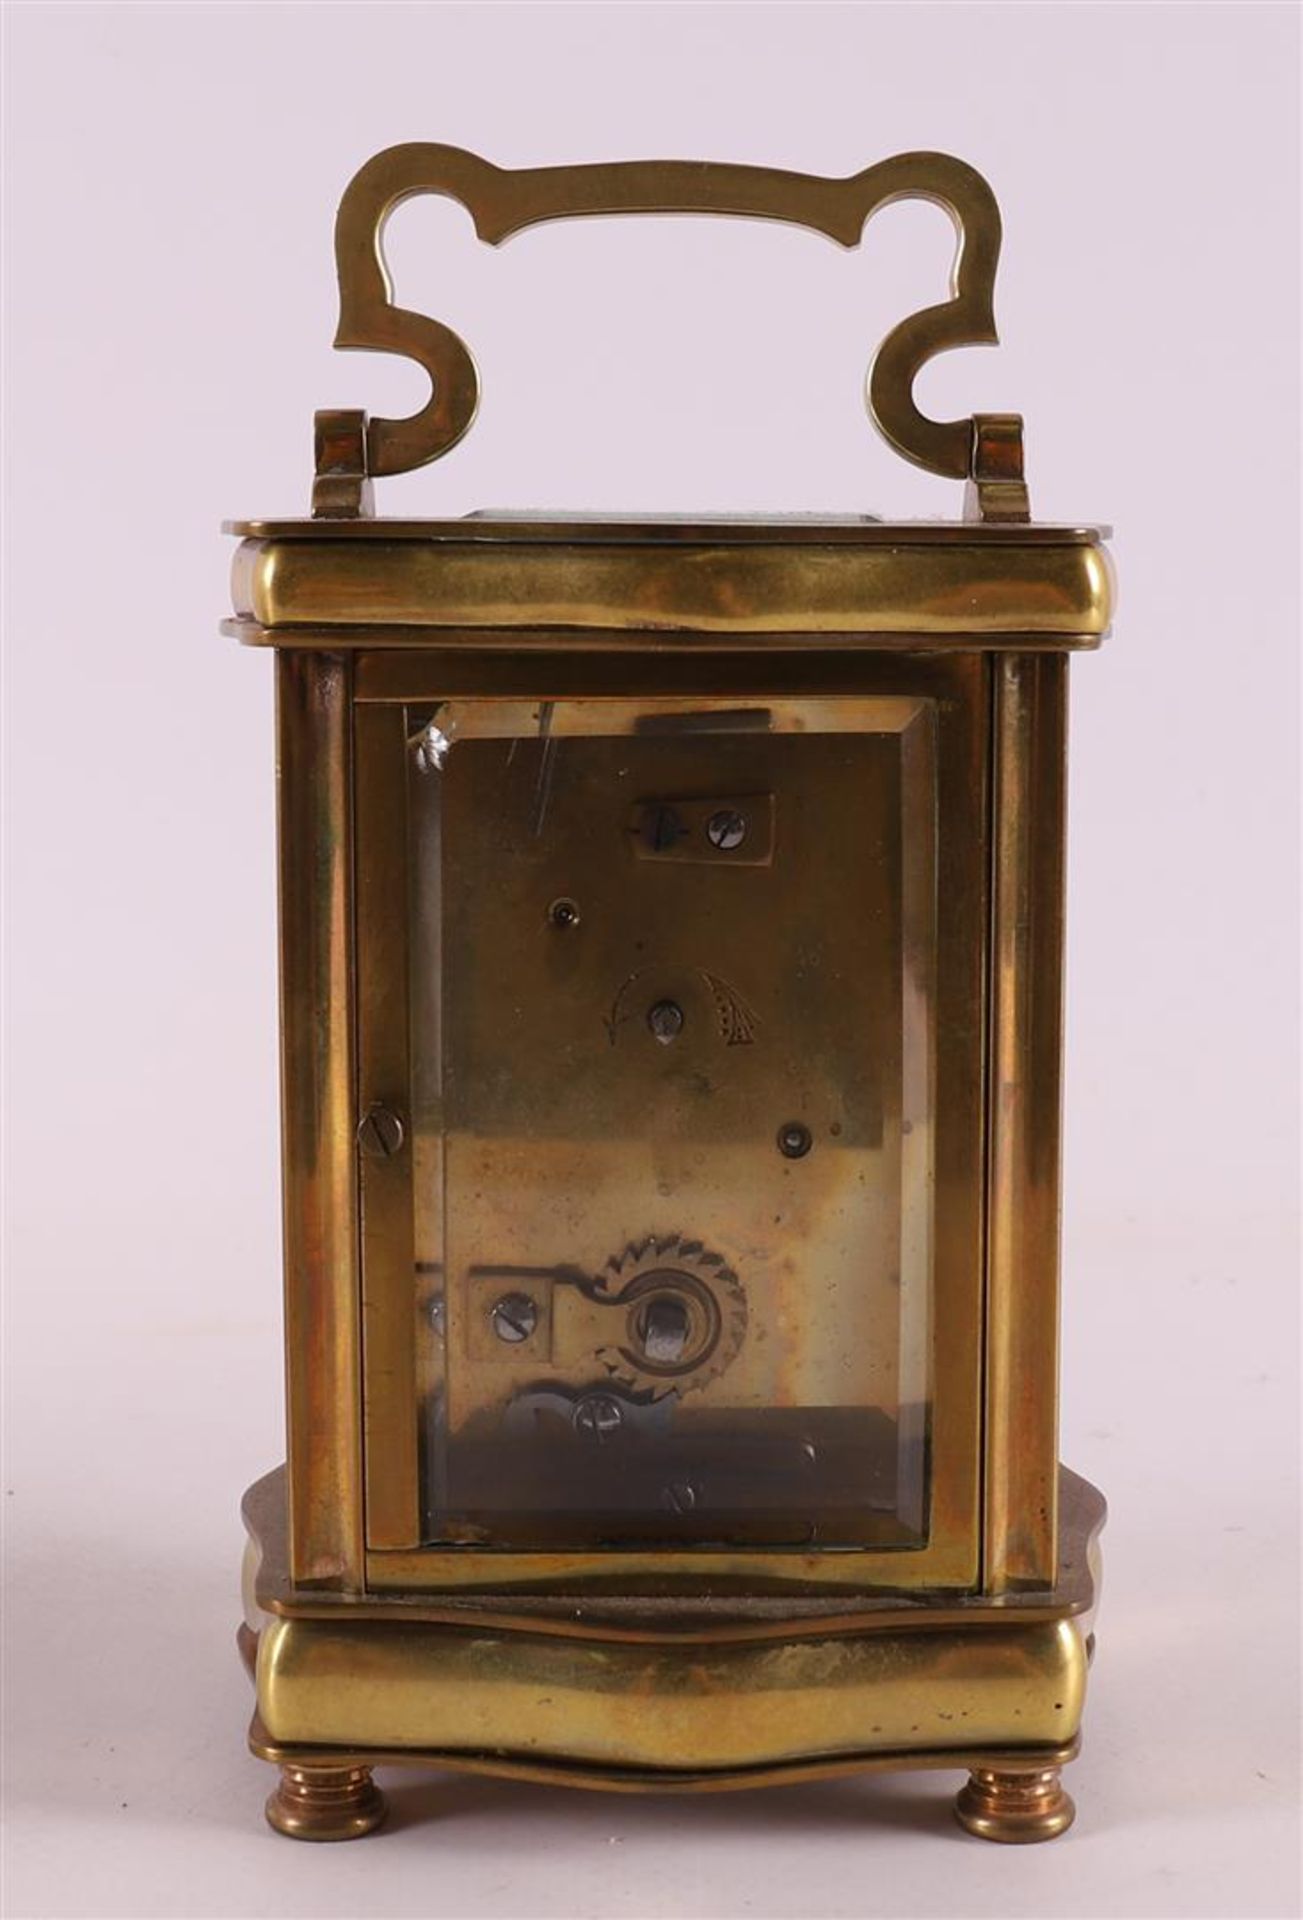 A travel clock in brass housing and original case, France, - Image 3 of 8